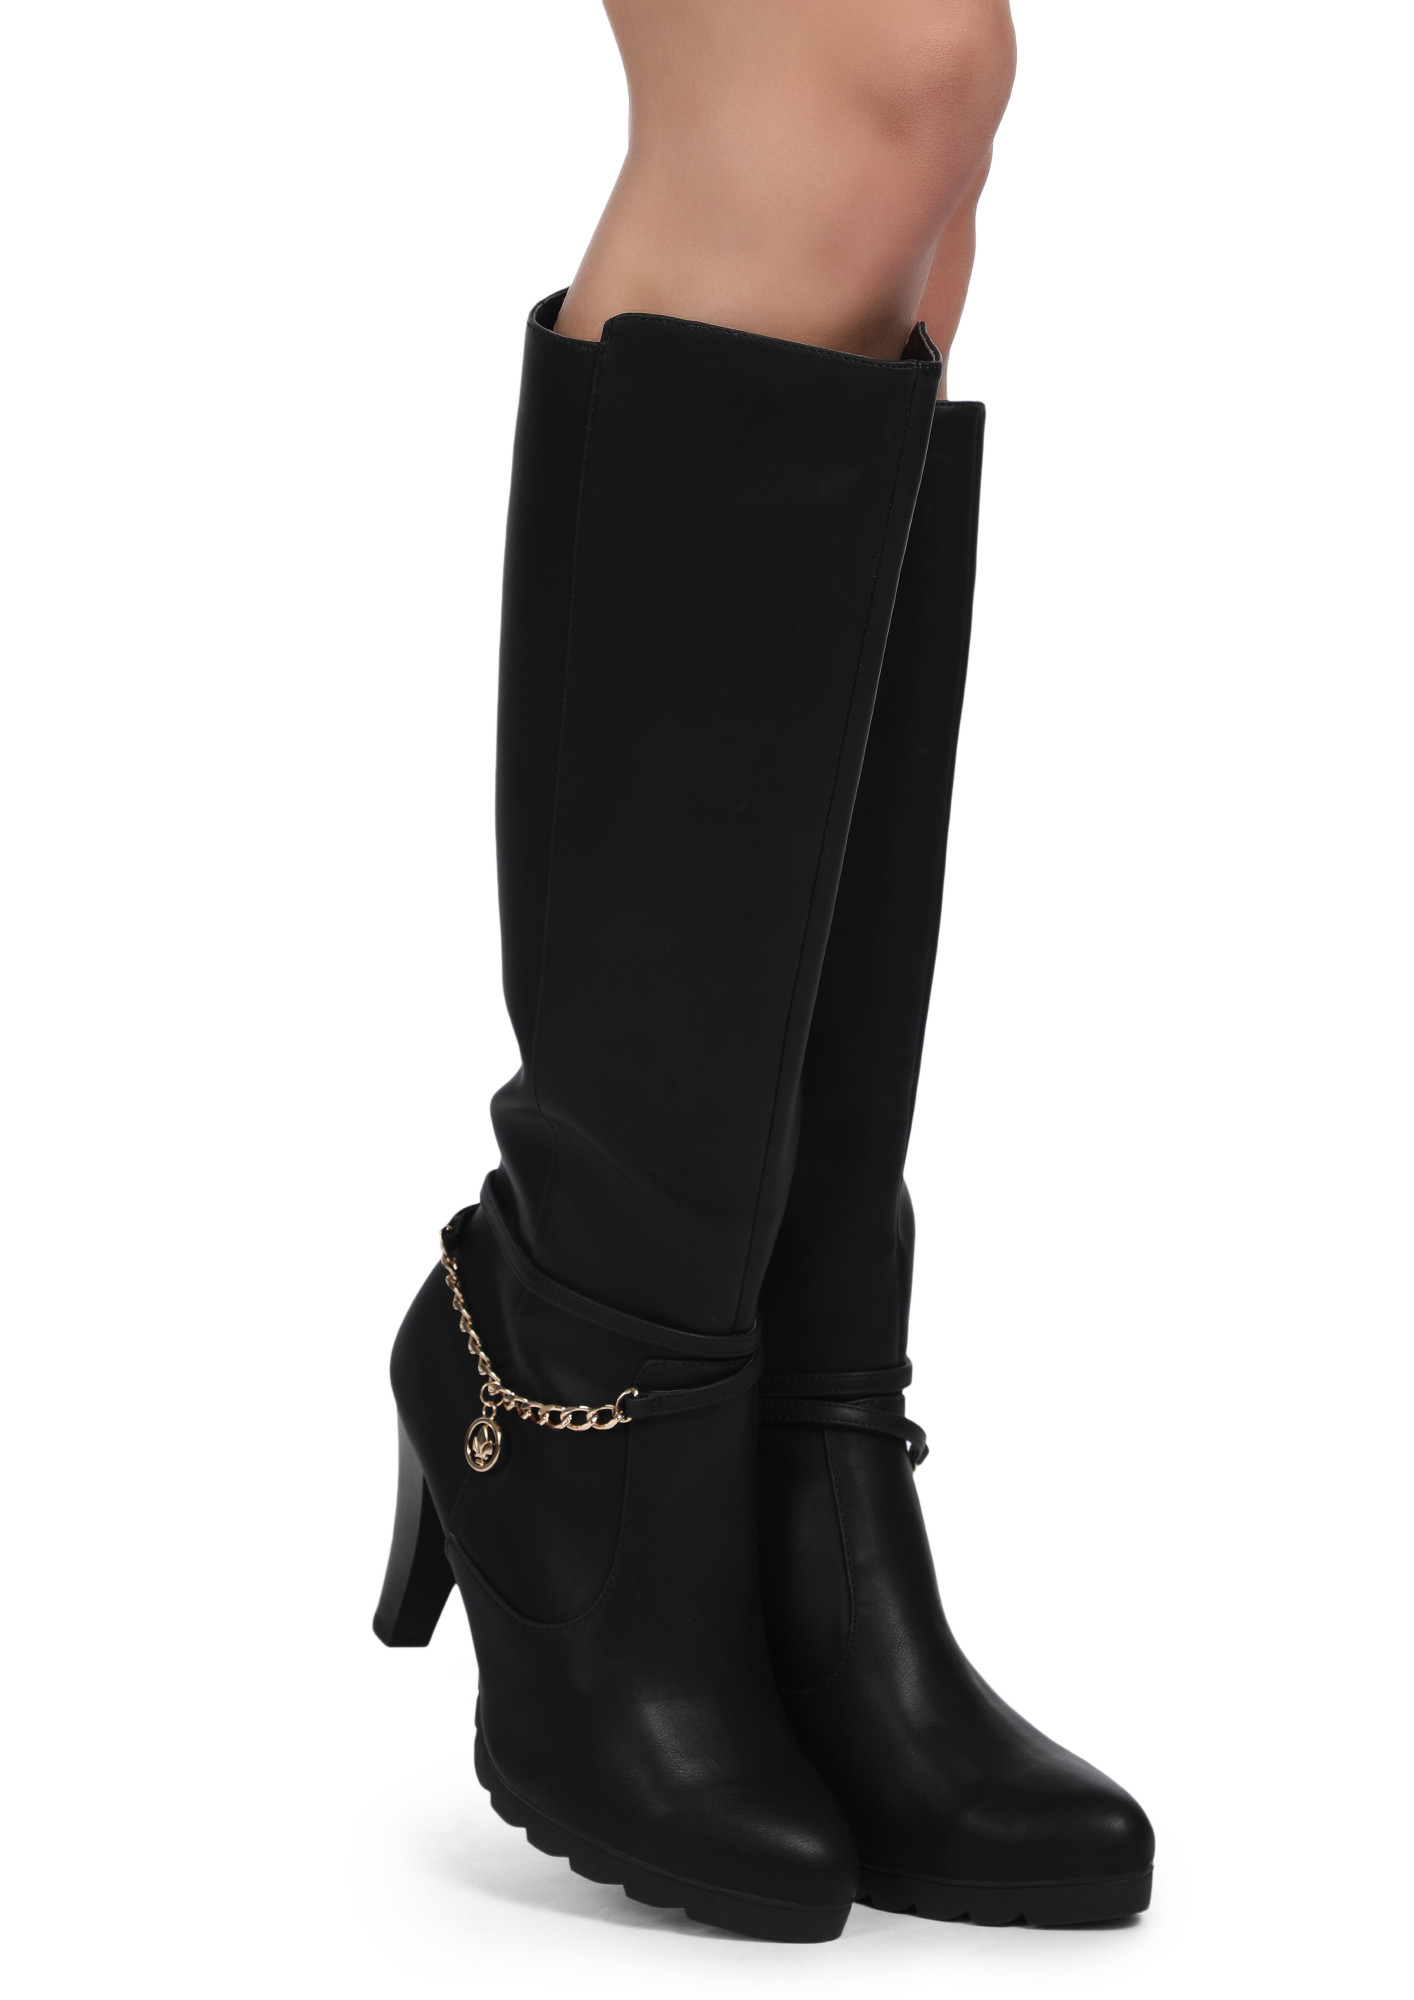 NIGHT IS SILENT BLACK MID-CALF BOOTS